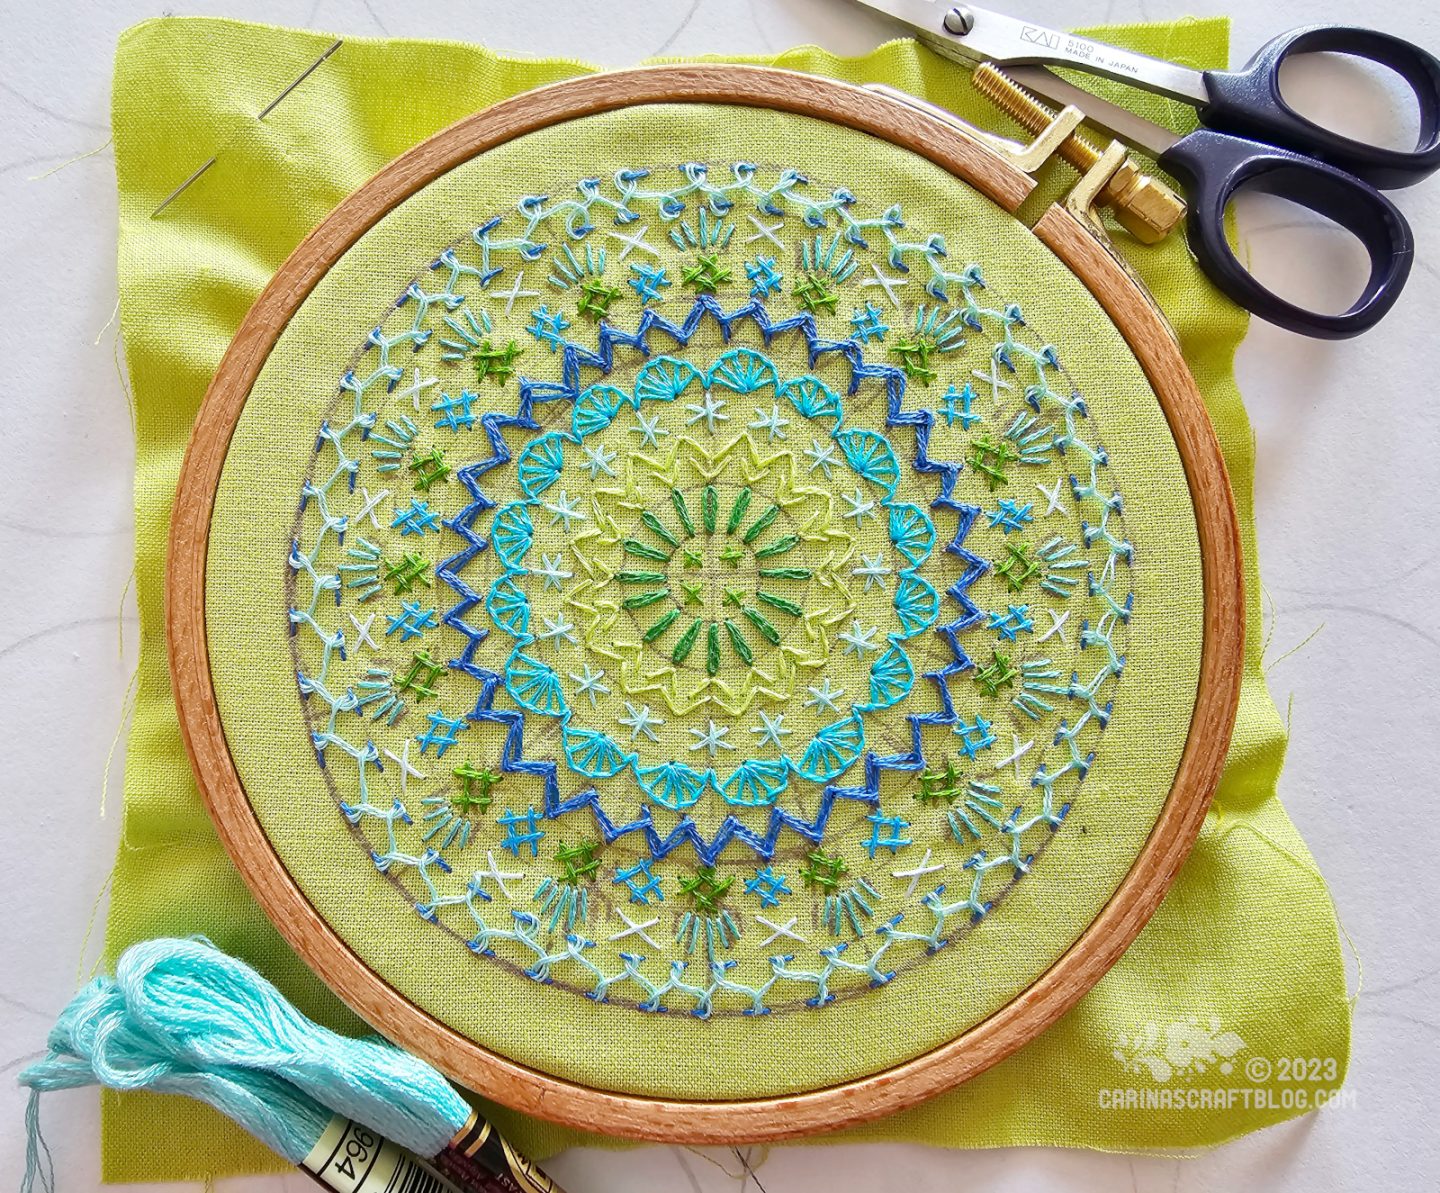 Overhead view of a wooden embroidery hoop with lime green fabric. On the fabric is embroidered a mandala inspired design in blue and green colours.